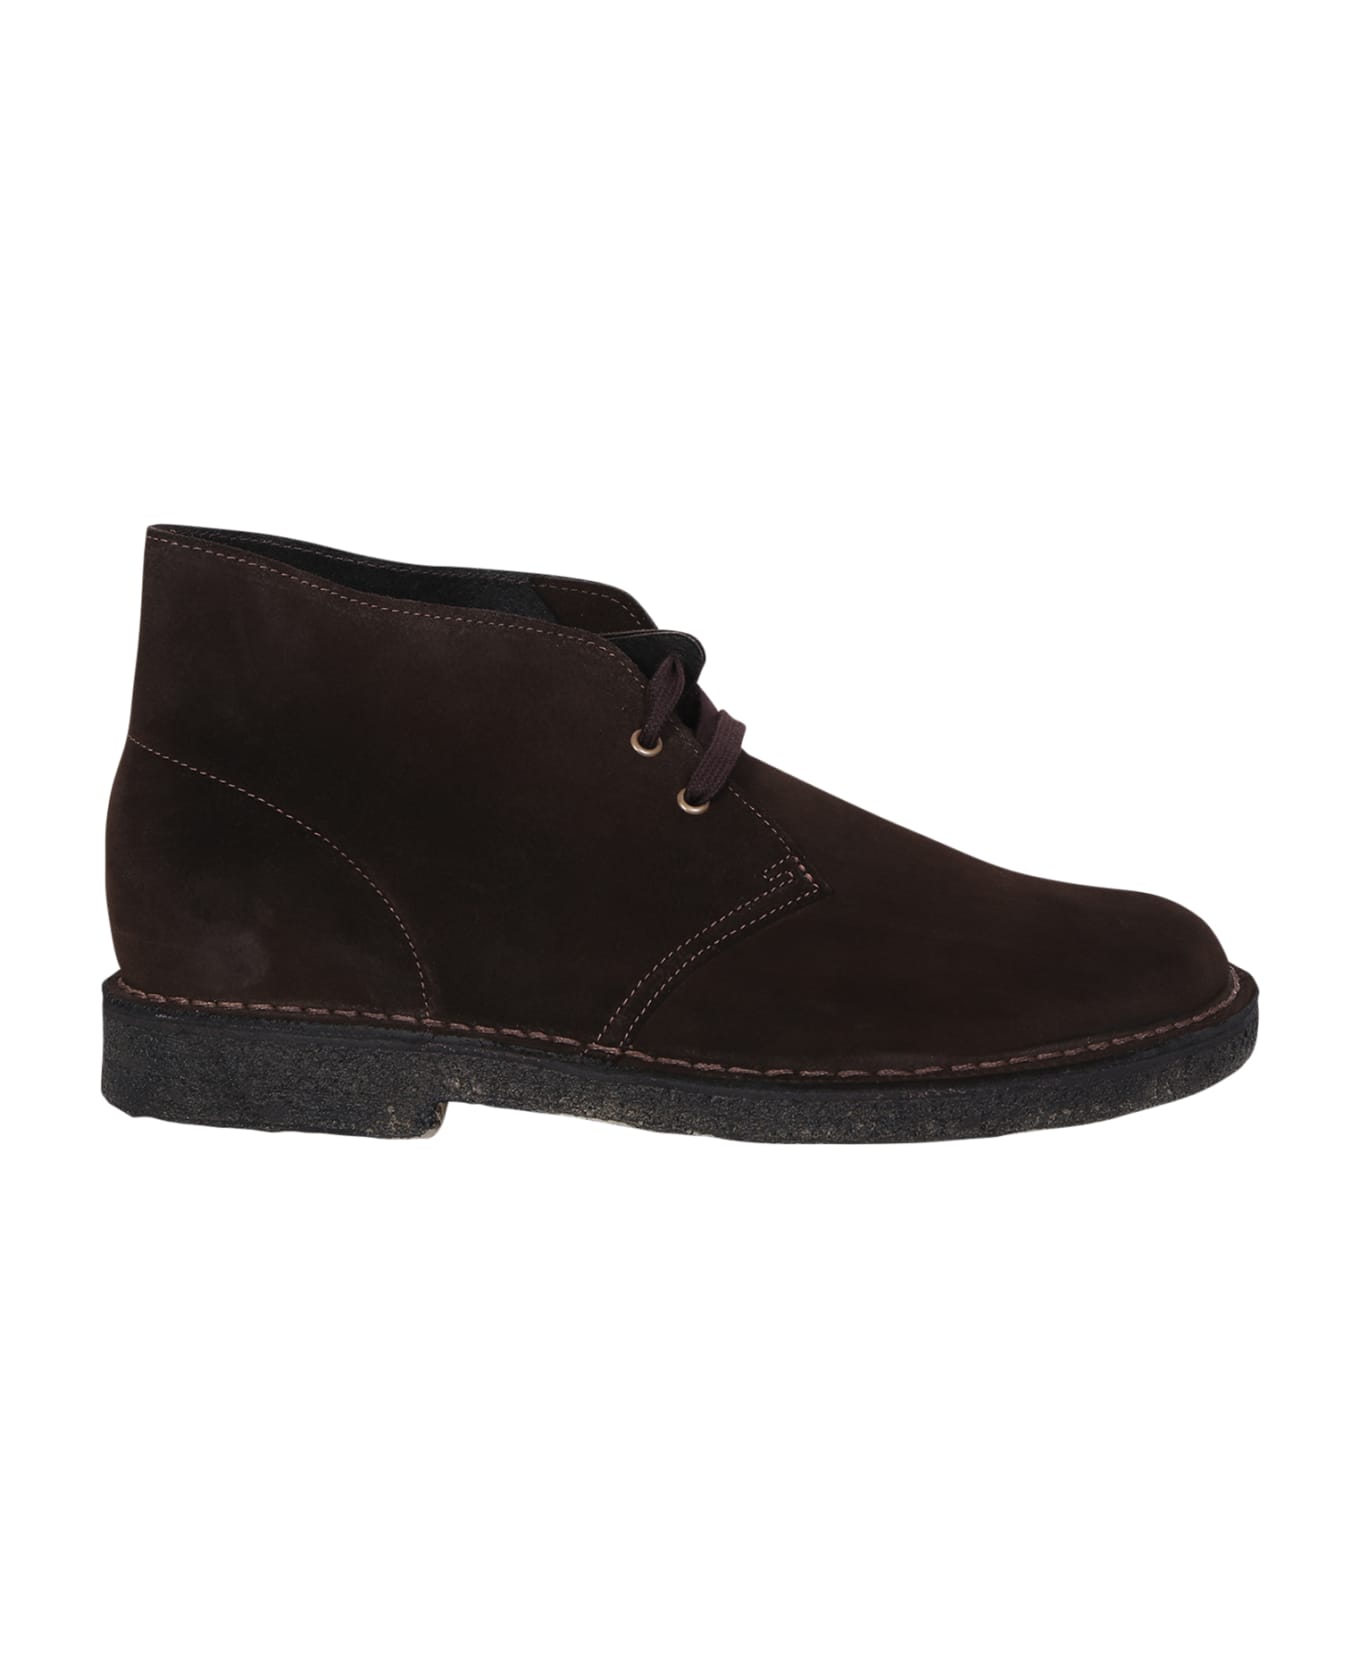 Clarks Boots - Brown ブーツ